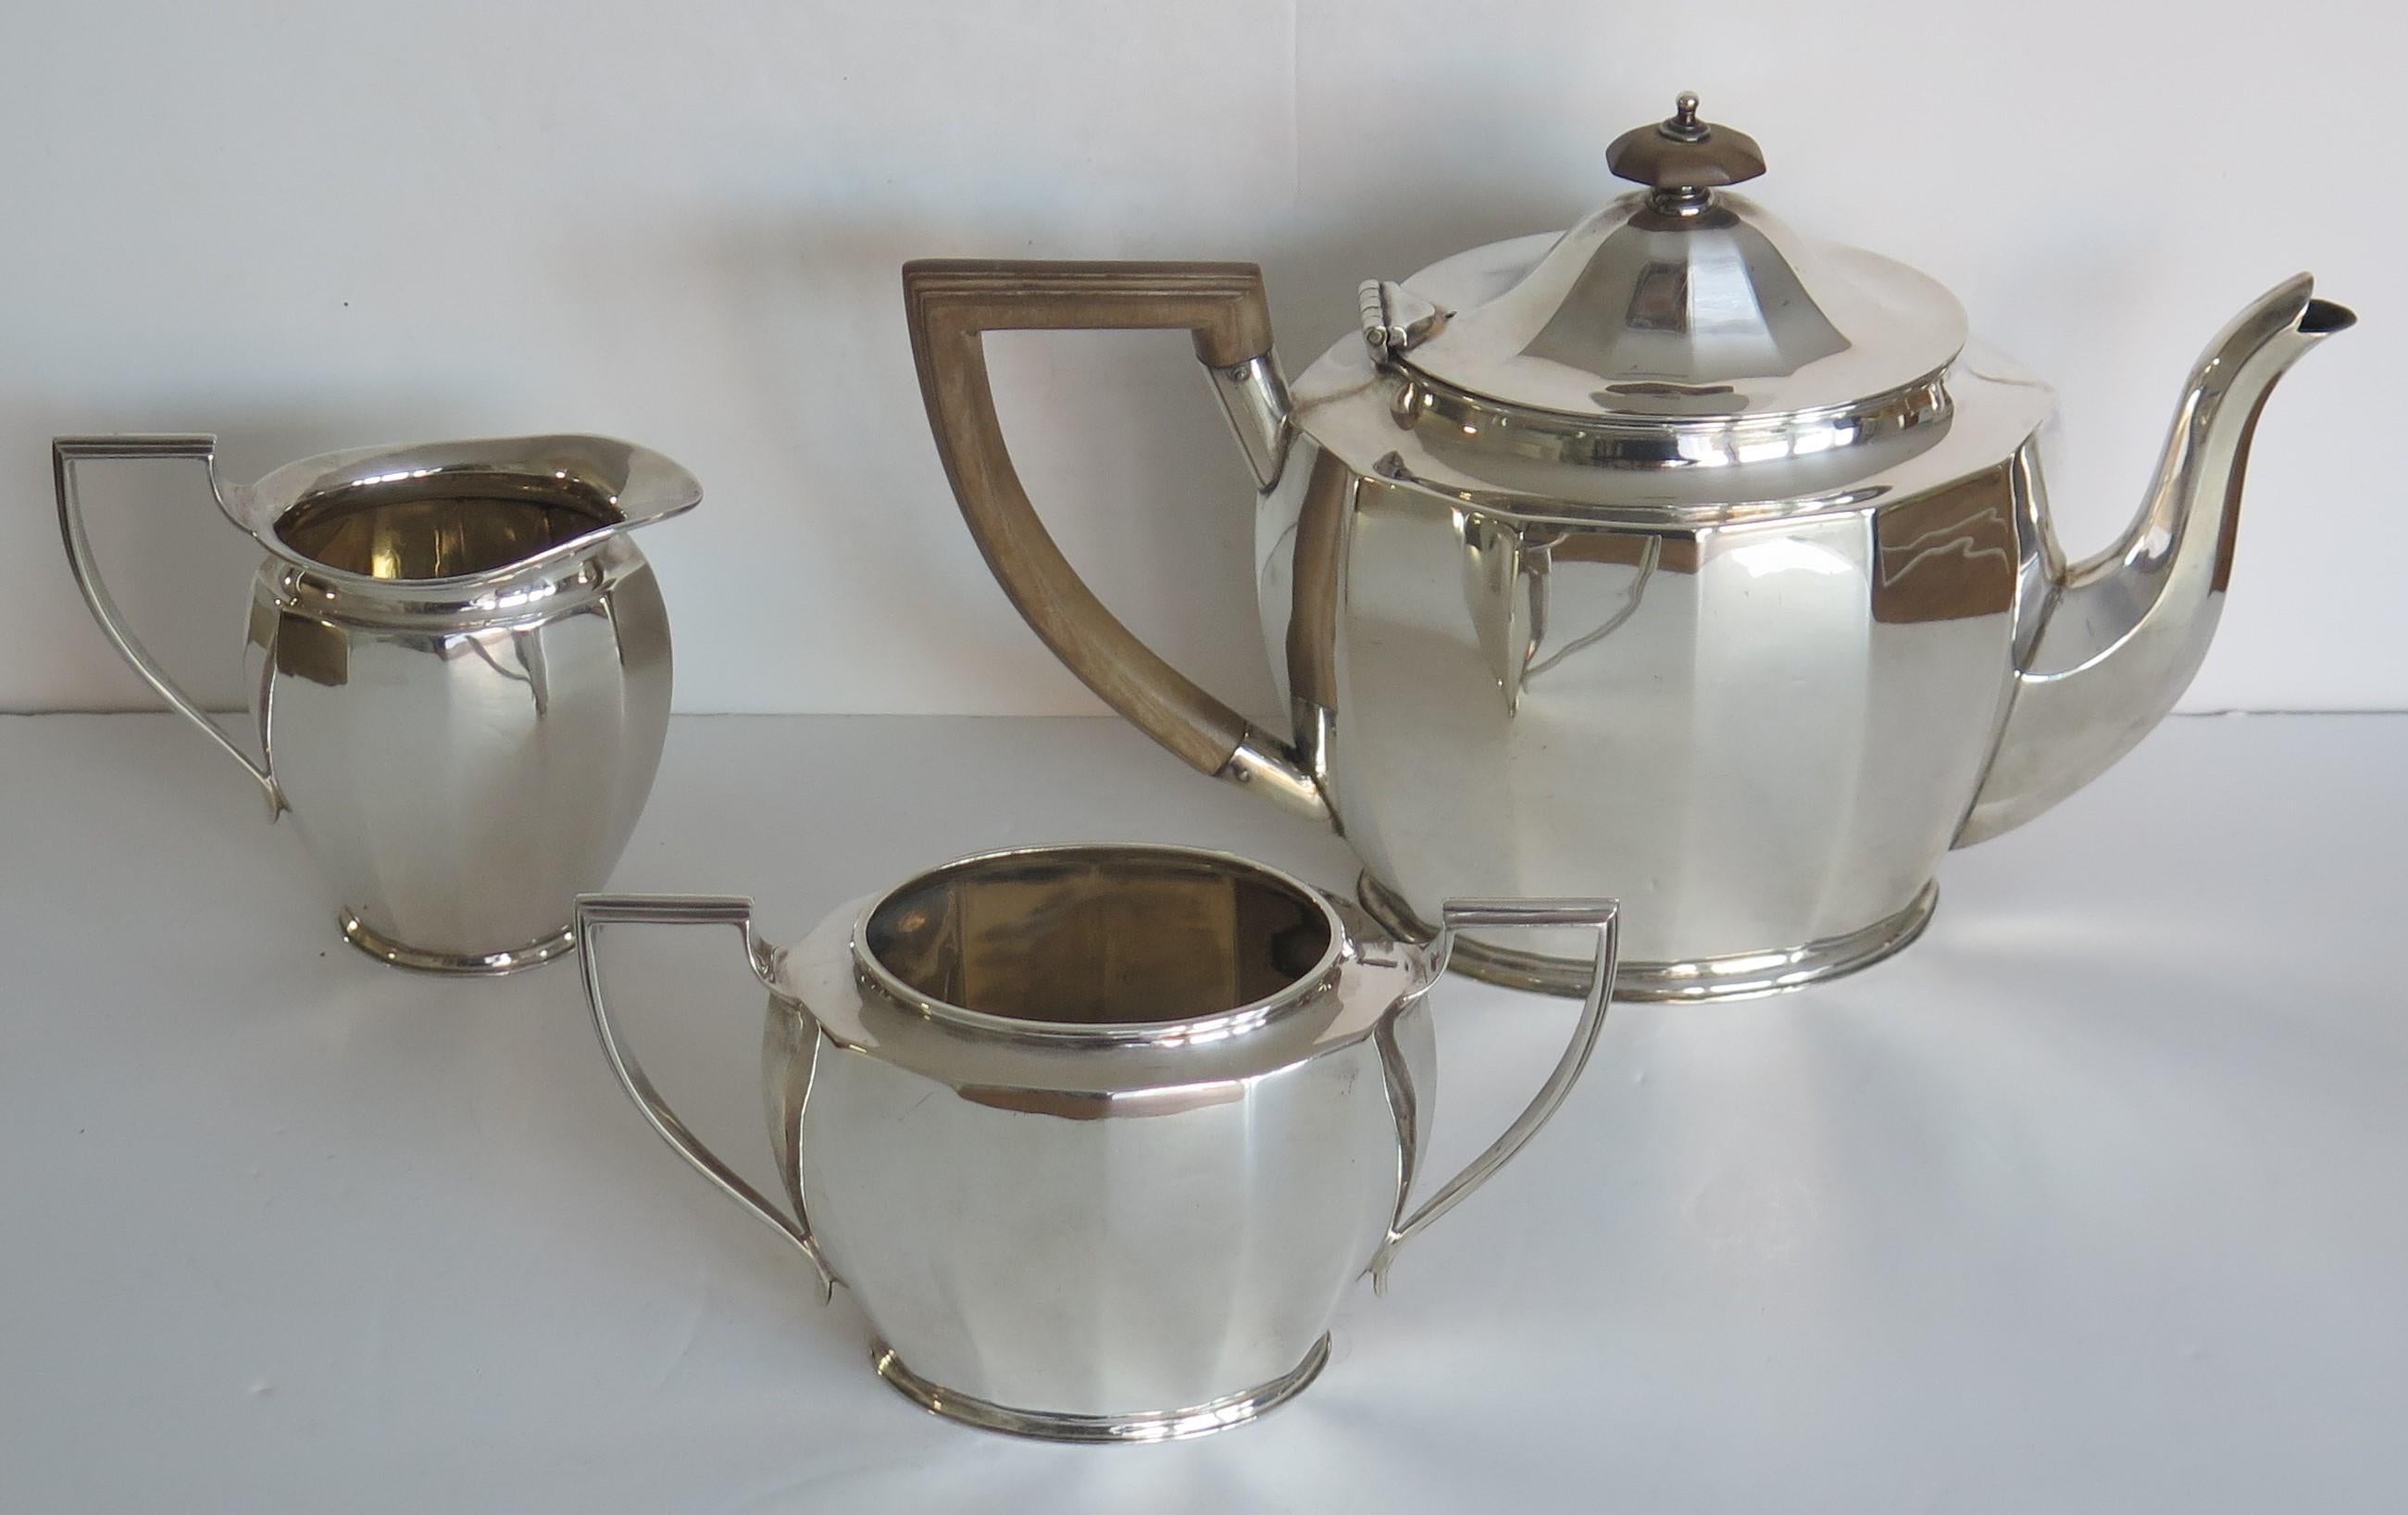 Hand-Crafted Art Deco Tea Set 3-Piece Sterling Silver Fine Quality, Sheffield England, 1930 For Sale